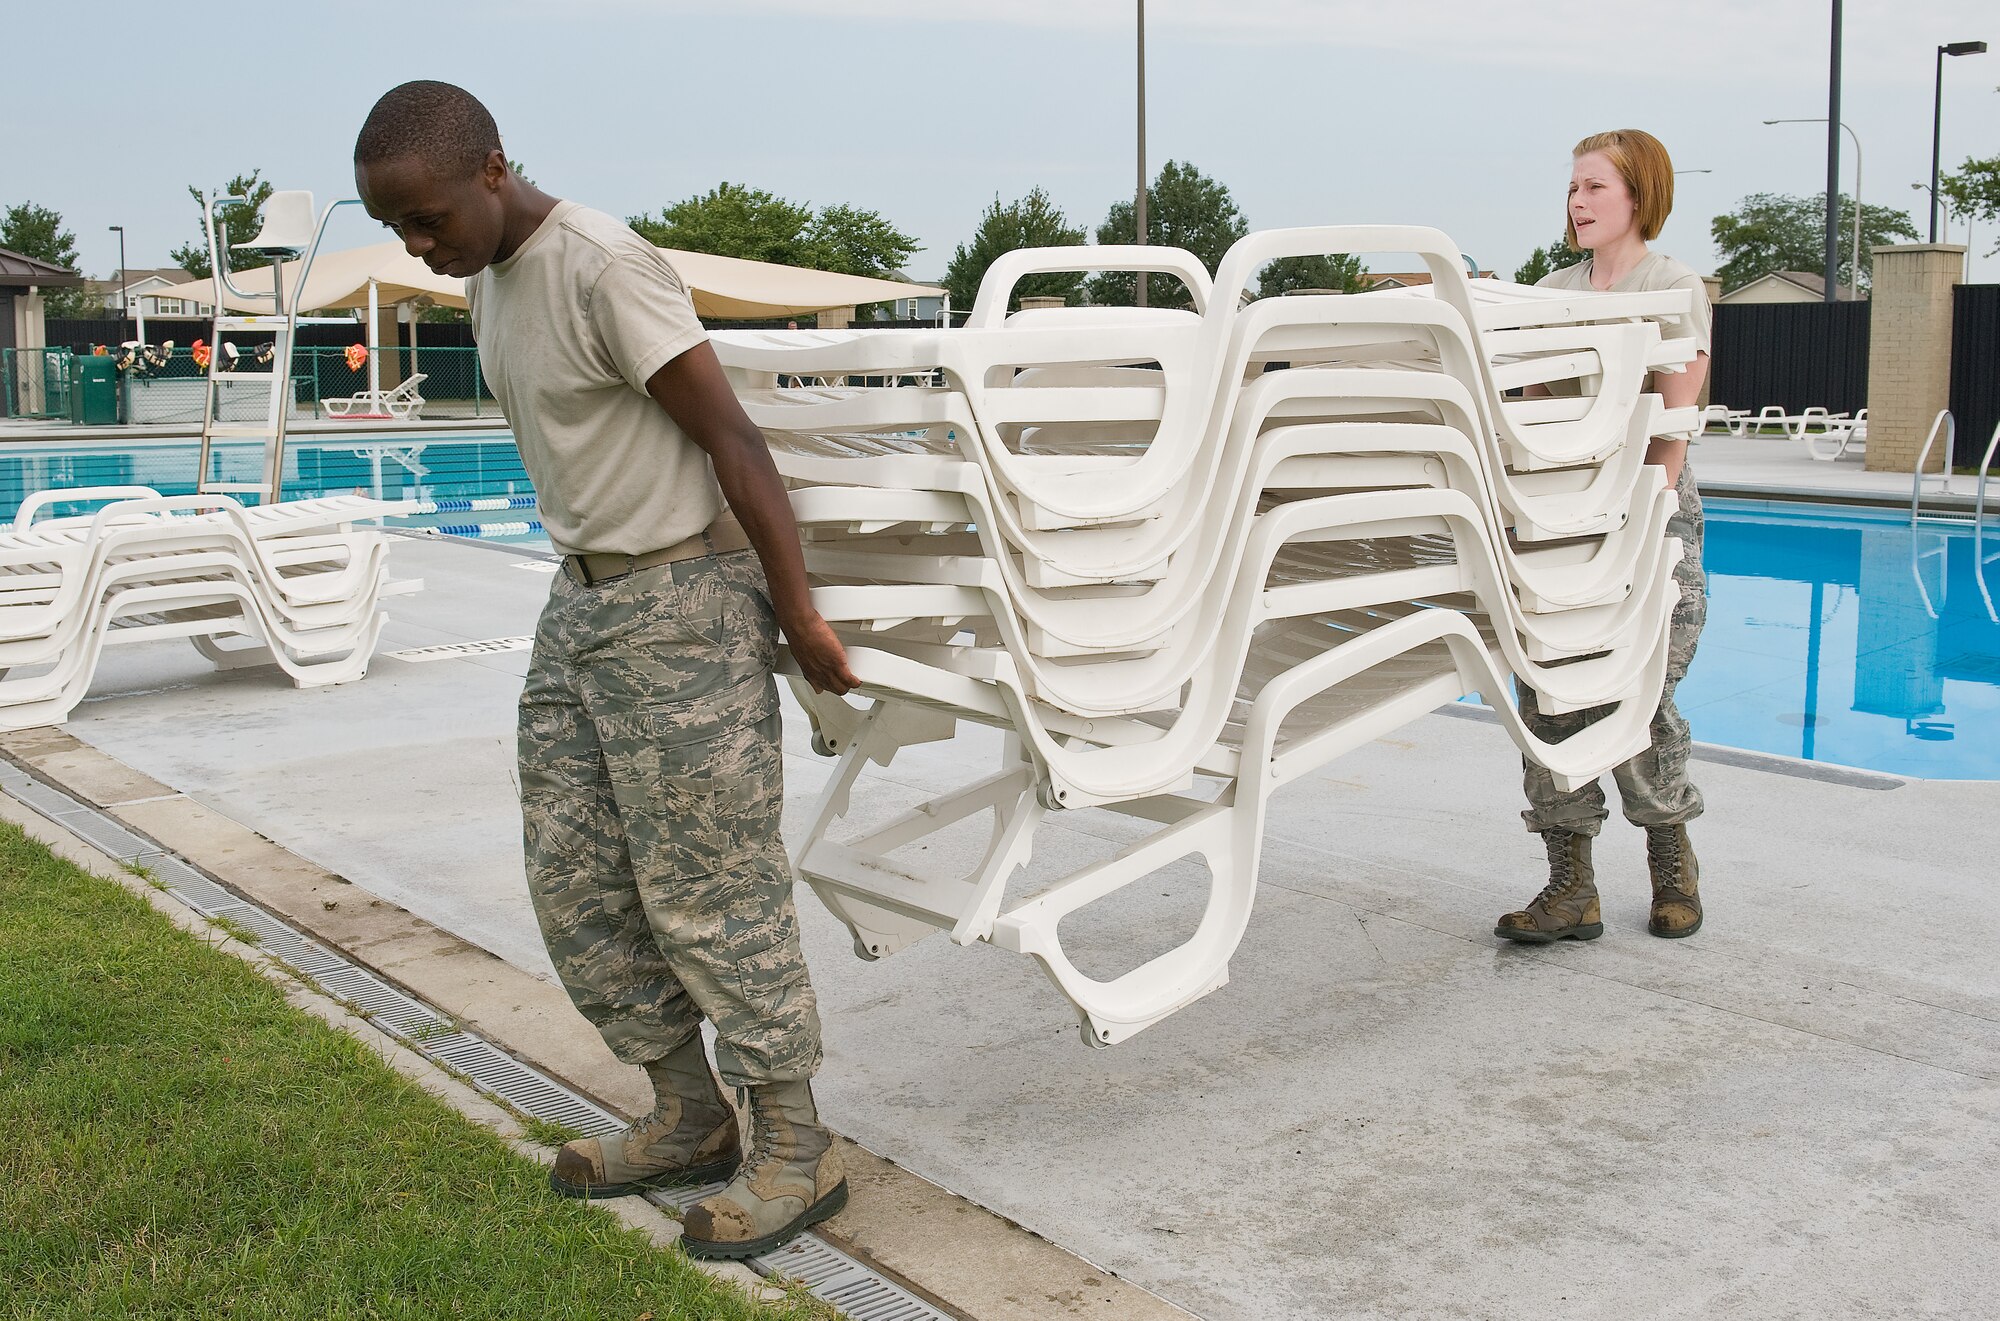 Airman 1st Class Paul Mutwiri and Senior Airman Alicia Jarrell, both assigned to the 436th Force Support Squadron, move pool chairs to a secure location Aug. 25, 2011, at the Oasis Base Pool at Dover Air Force Base, Del. (U.S. Air Force photo by Roland Balik)